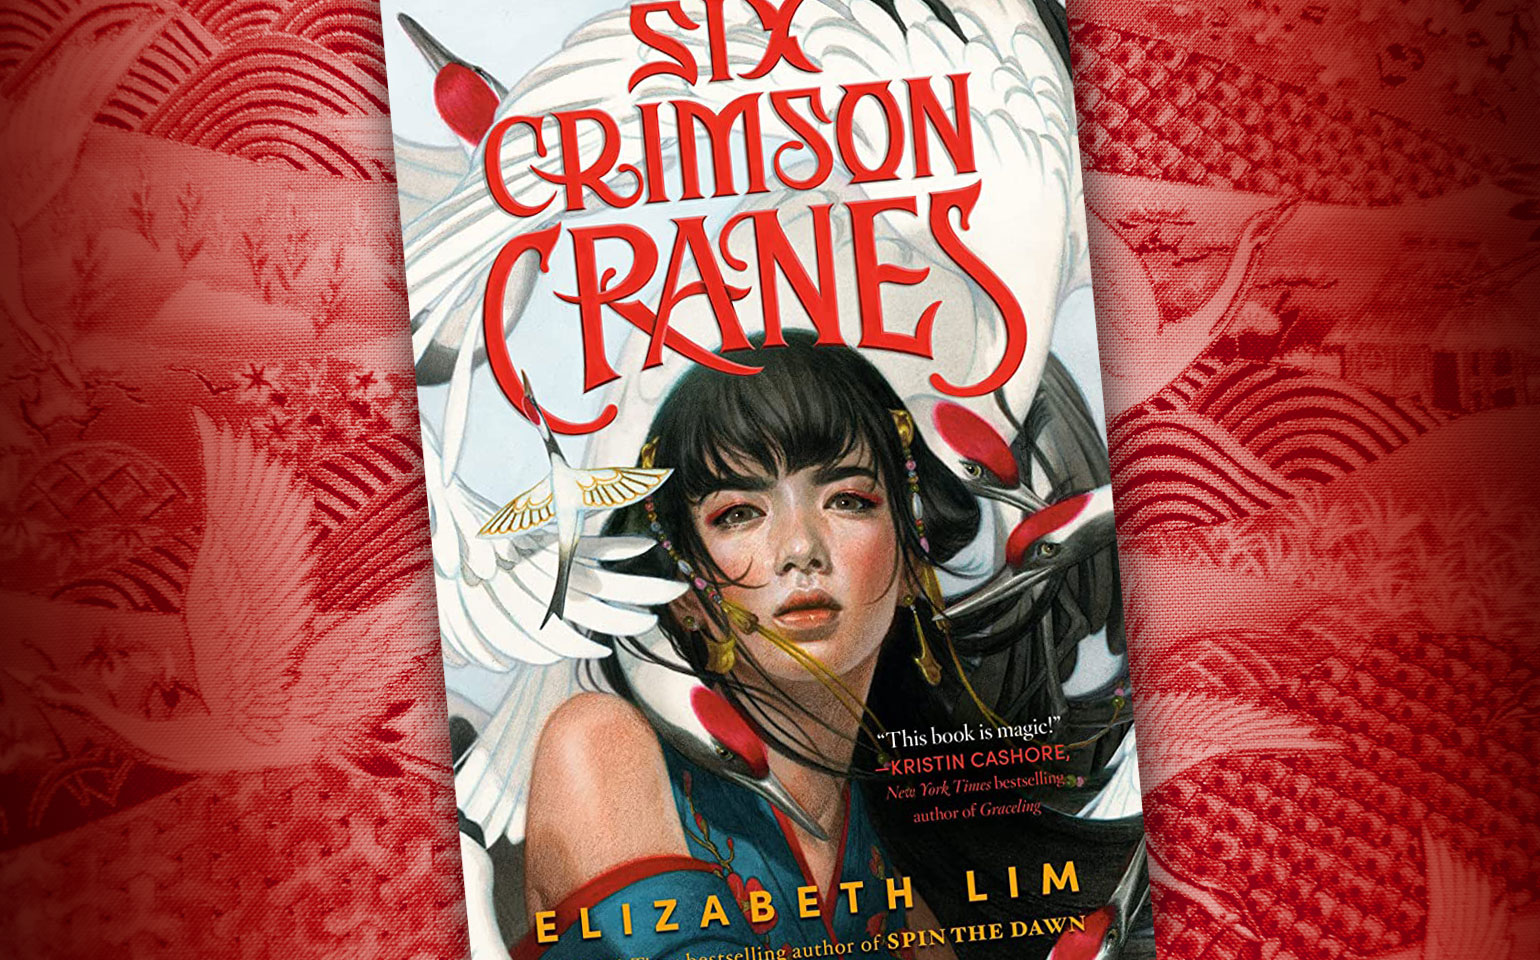 The cover of Six Crimson Cranes is shown, with the main character taking centre stage.